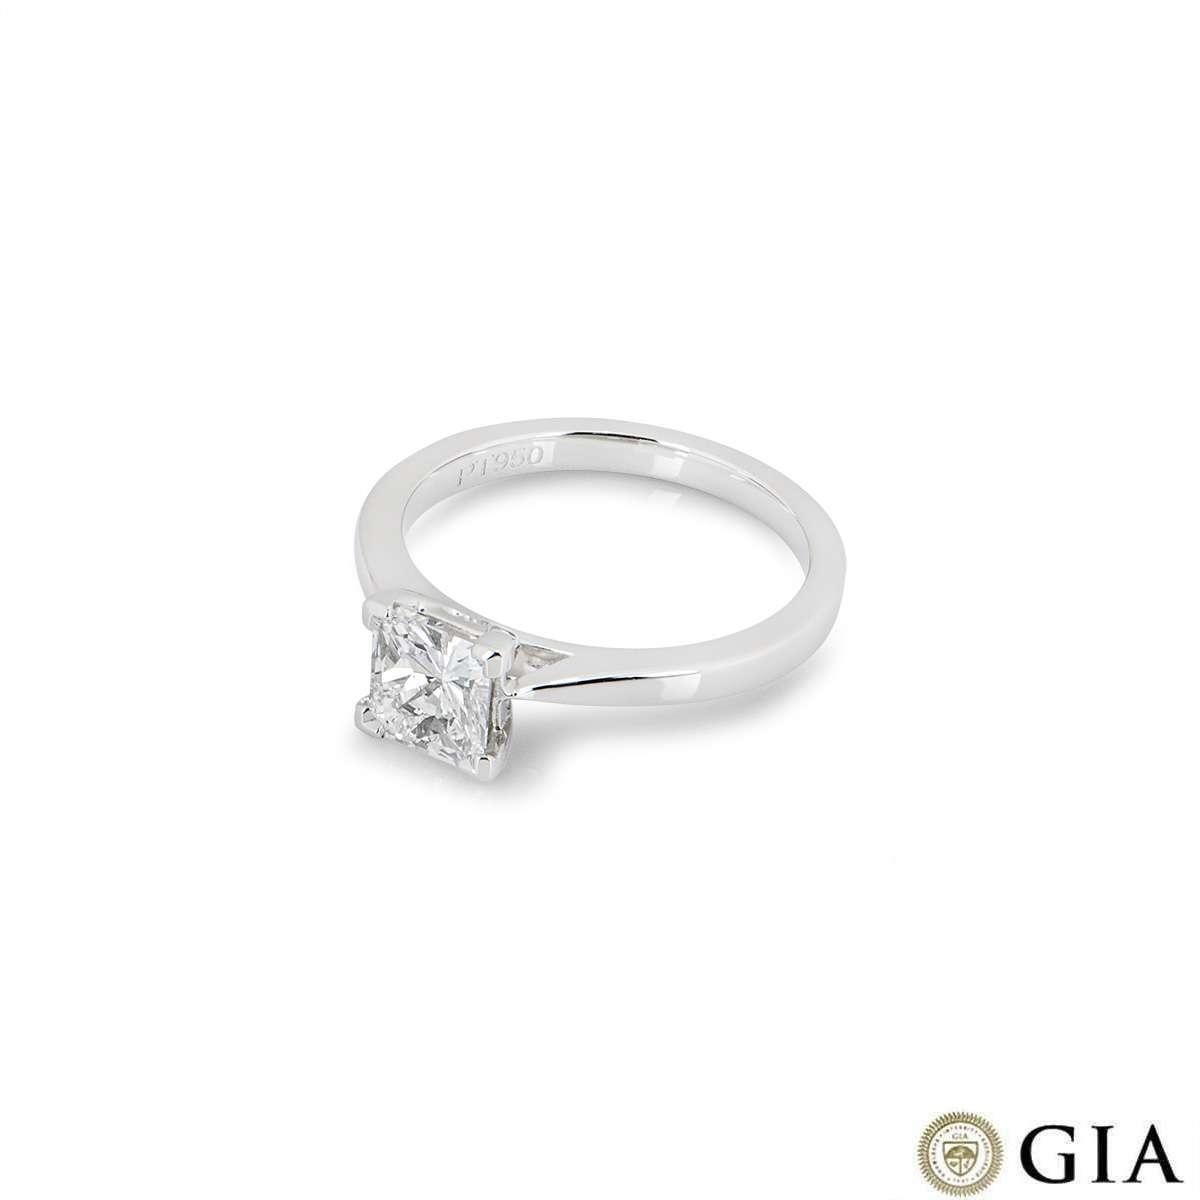 Women's GIA Certified Platinum Radiant Cut Diamond Ring 1.03ct F/VS1 For Sale